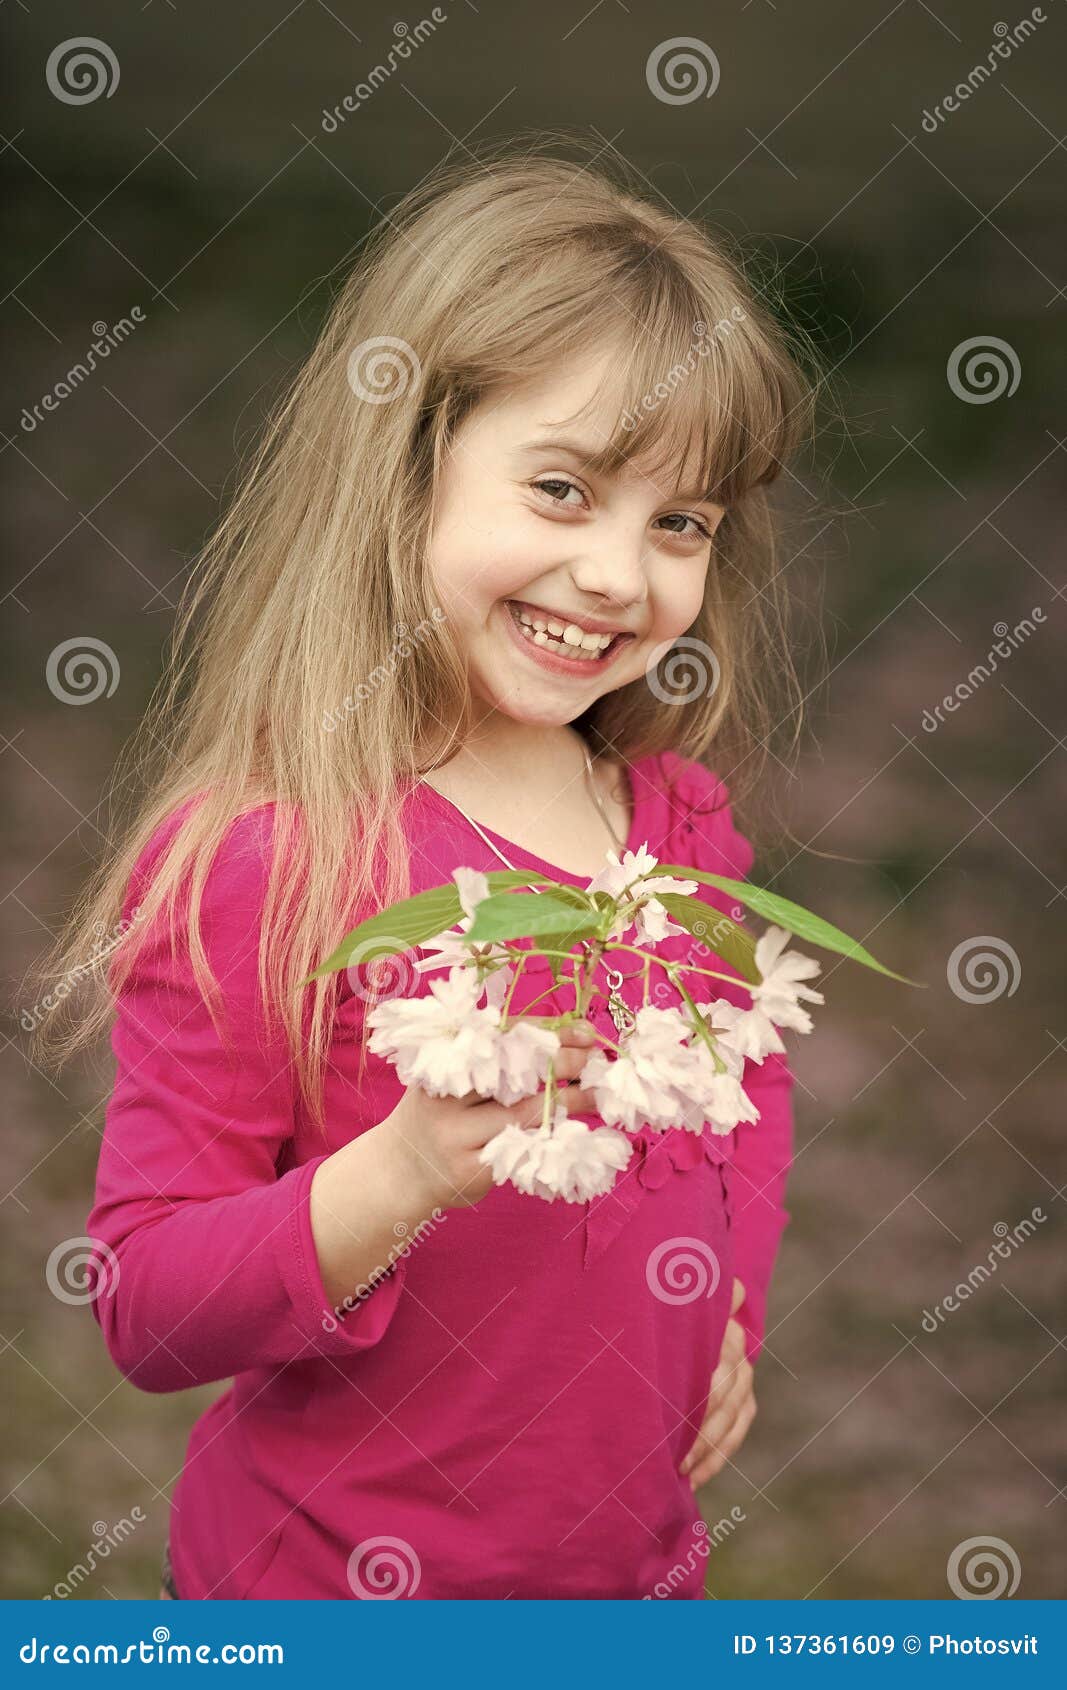 Small Baby Girl with Smiling Face Holding Pink Sakura Blossom ...